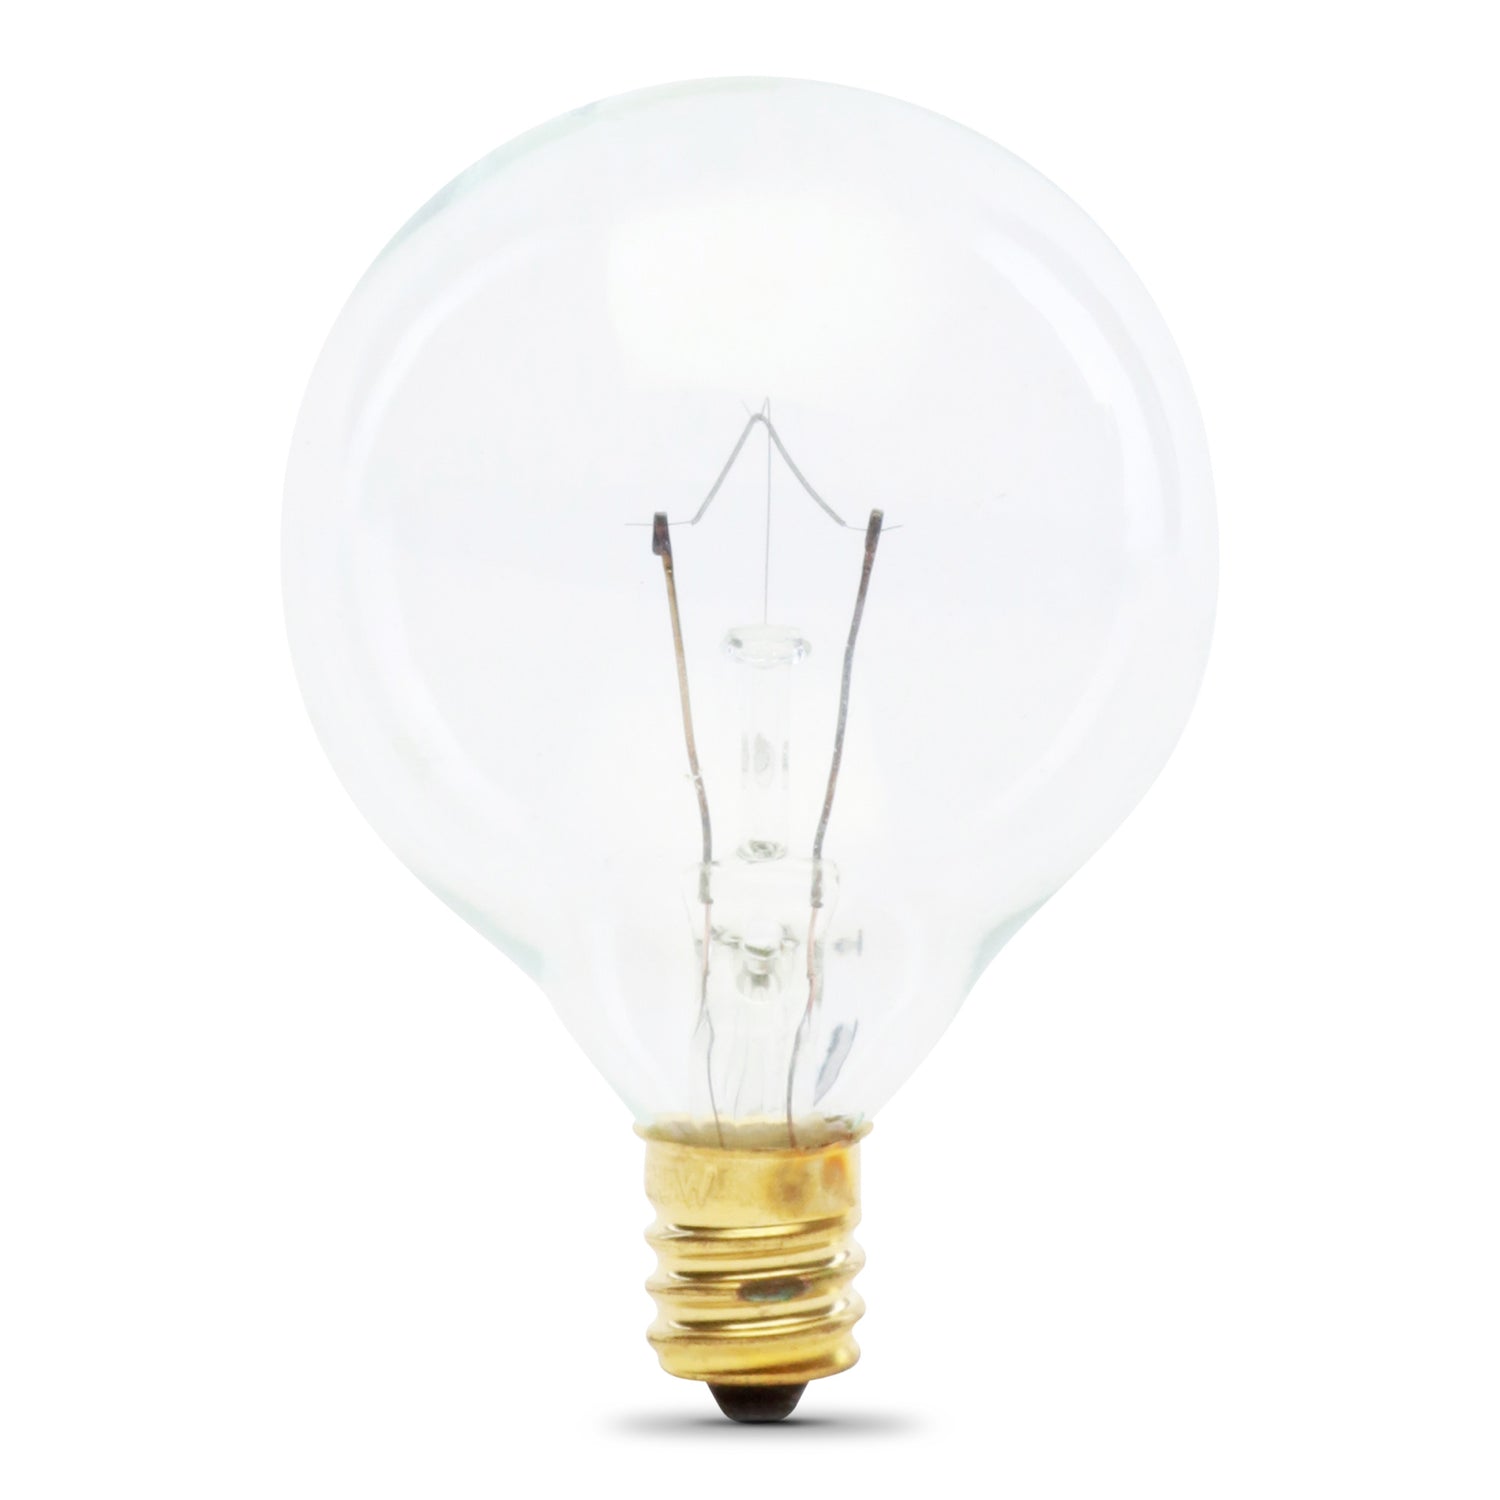 25W Soft White G16 1/2 Globe Shape Dimmable Clear Incandescent Chandelier Light Bulb (2-Pack)